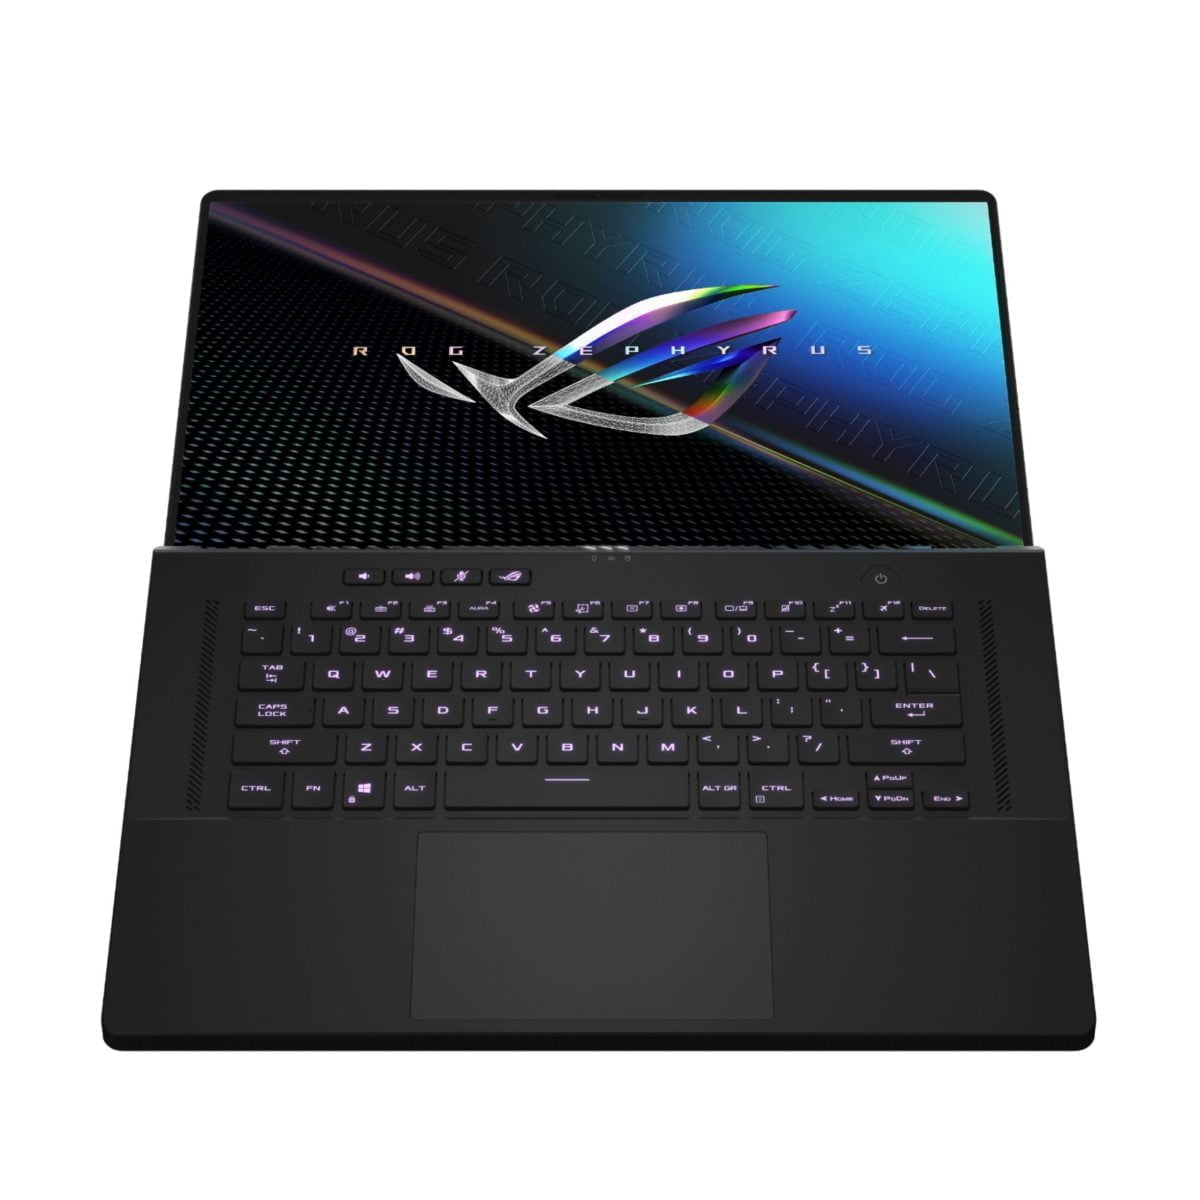 6464203Cv11D Asus &Lt;H1 Class=&Quot;Heading-5 V-Fw-Regular&Quot;&Gt;Asus - Rog Zephyrus M16 Gu603 Gaming Laptop - Intel Core I9 - 16Gb Memory - Nvidia Rtx3060 - 1Tb Ssd - Off Black&Lt;/H1&Gt;&Lt;Div Class=&Quot;Wpview Wpview-Wrap&Quot; Data-Wpview-Text=&Quot;Https%3A%2F%2Fyoutu.be%2Fmjlzzqnixki&Quot; Data-Wpview-Type=&Quot;Embedurl&Quot;&Gt;&Lt;Span Class=&Quot;Mce-Shim&Quot;&Gt;&Lt;/Span&Gt;&Lt;Span Class=&Quot;Wpview-End&Quot;&Gt;&Lt;/Span&Gt;&Lt;/Div&Gt;&Lt;P&Gt;Asus Rog Gaming Laptop. Enjoy Everyday Gaming With This Asus Notebook Pc. The 11Th Gen Intel Core I9 Processor And 16Gb Of Ram Let You Run Graphics-Heavy Games Smoothly, While The Potent Nvidia Rtx3060 Graphics Produce High-Quality Visuals On The New Fast 16-Inch 165Hz Wqxga Display. This Asus Notebook Pc Has 1Tb Ssd That Shortens Load Times And Offers Ample Storage.&Lt;/P&Gt; Asus Rog Gaming Laptop Asus - Rog Zephyrus M16 Gu603 Gaming Laptop - Intel Core I9 - 16Gb Memory - Nvidia Rtx3060 - 1Tb Ssd - Off Black